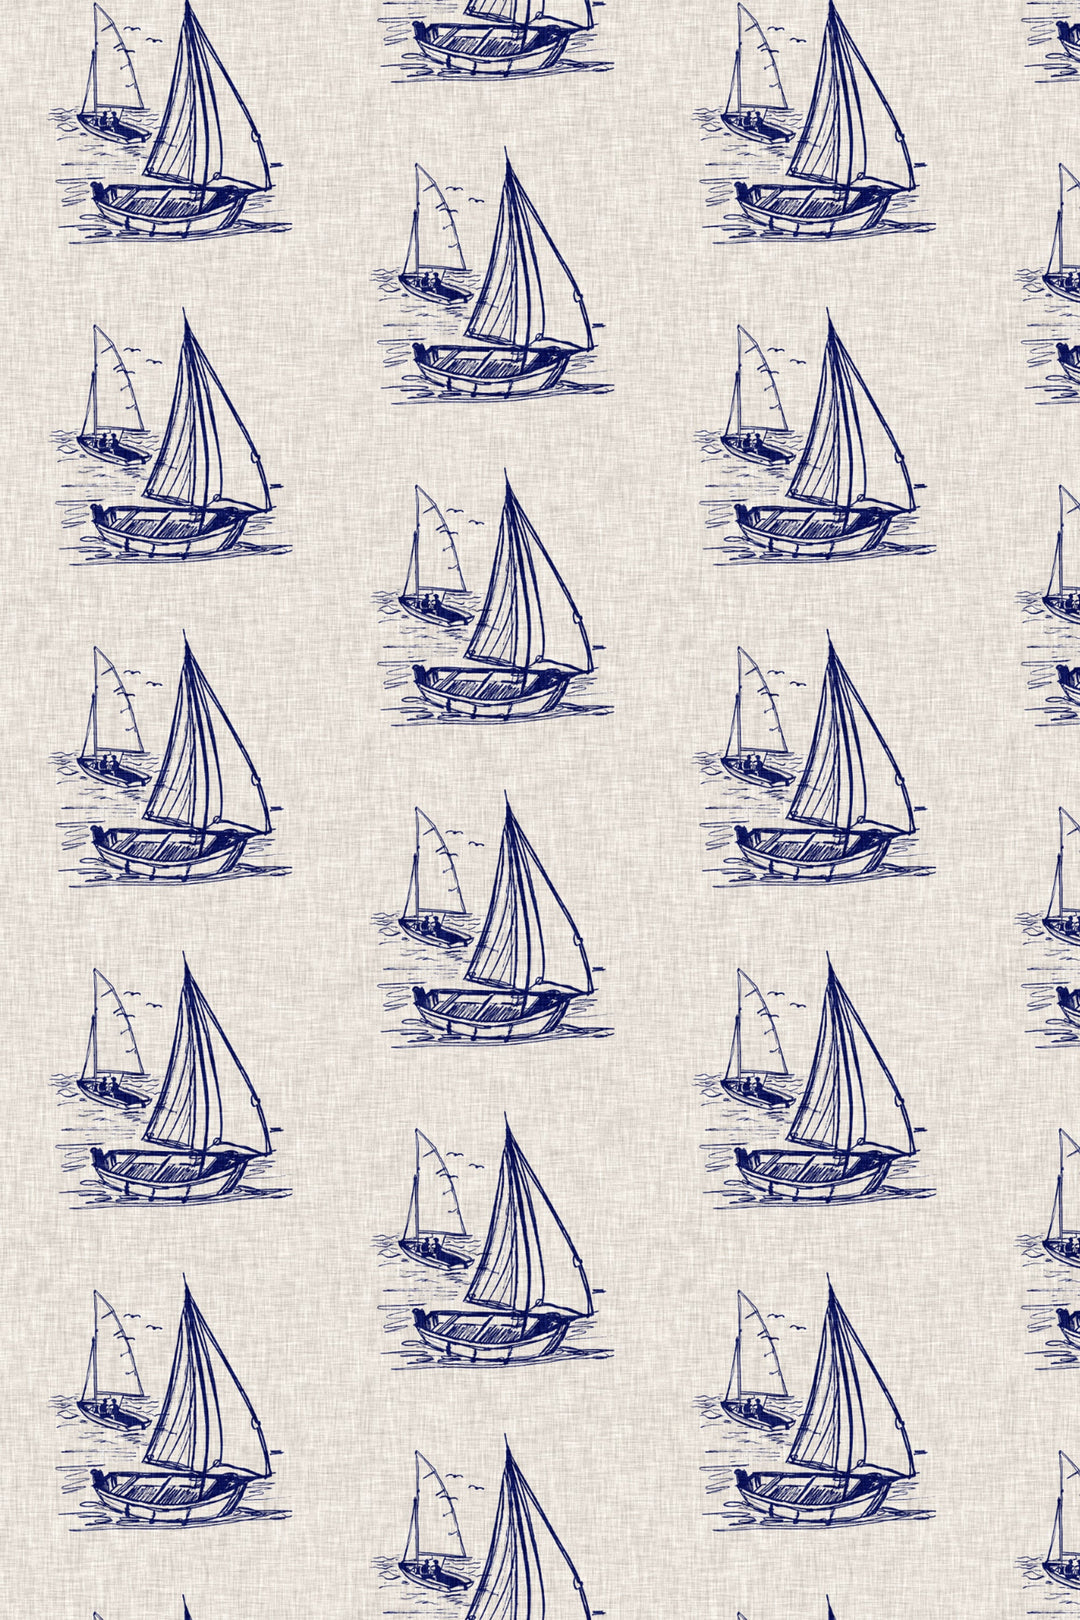 Hand drawn ships on a linen background  - Removable wallpaper - Vinyl Peel and Stick Wallpaper design #3329